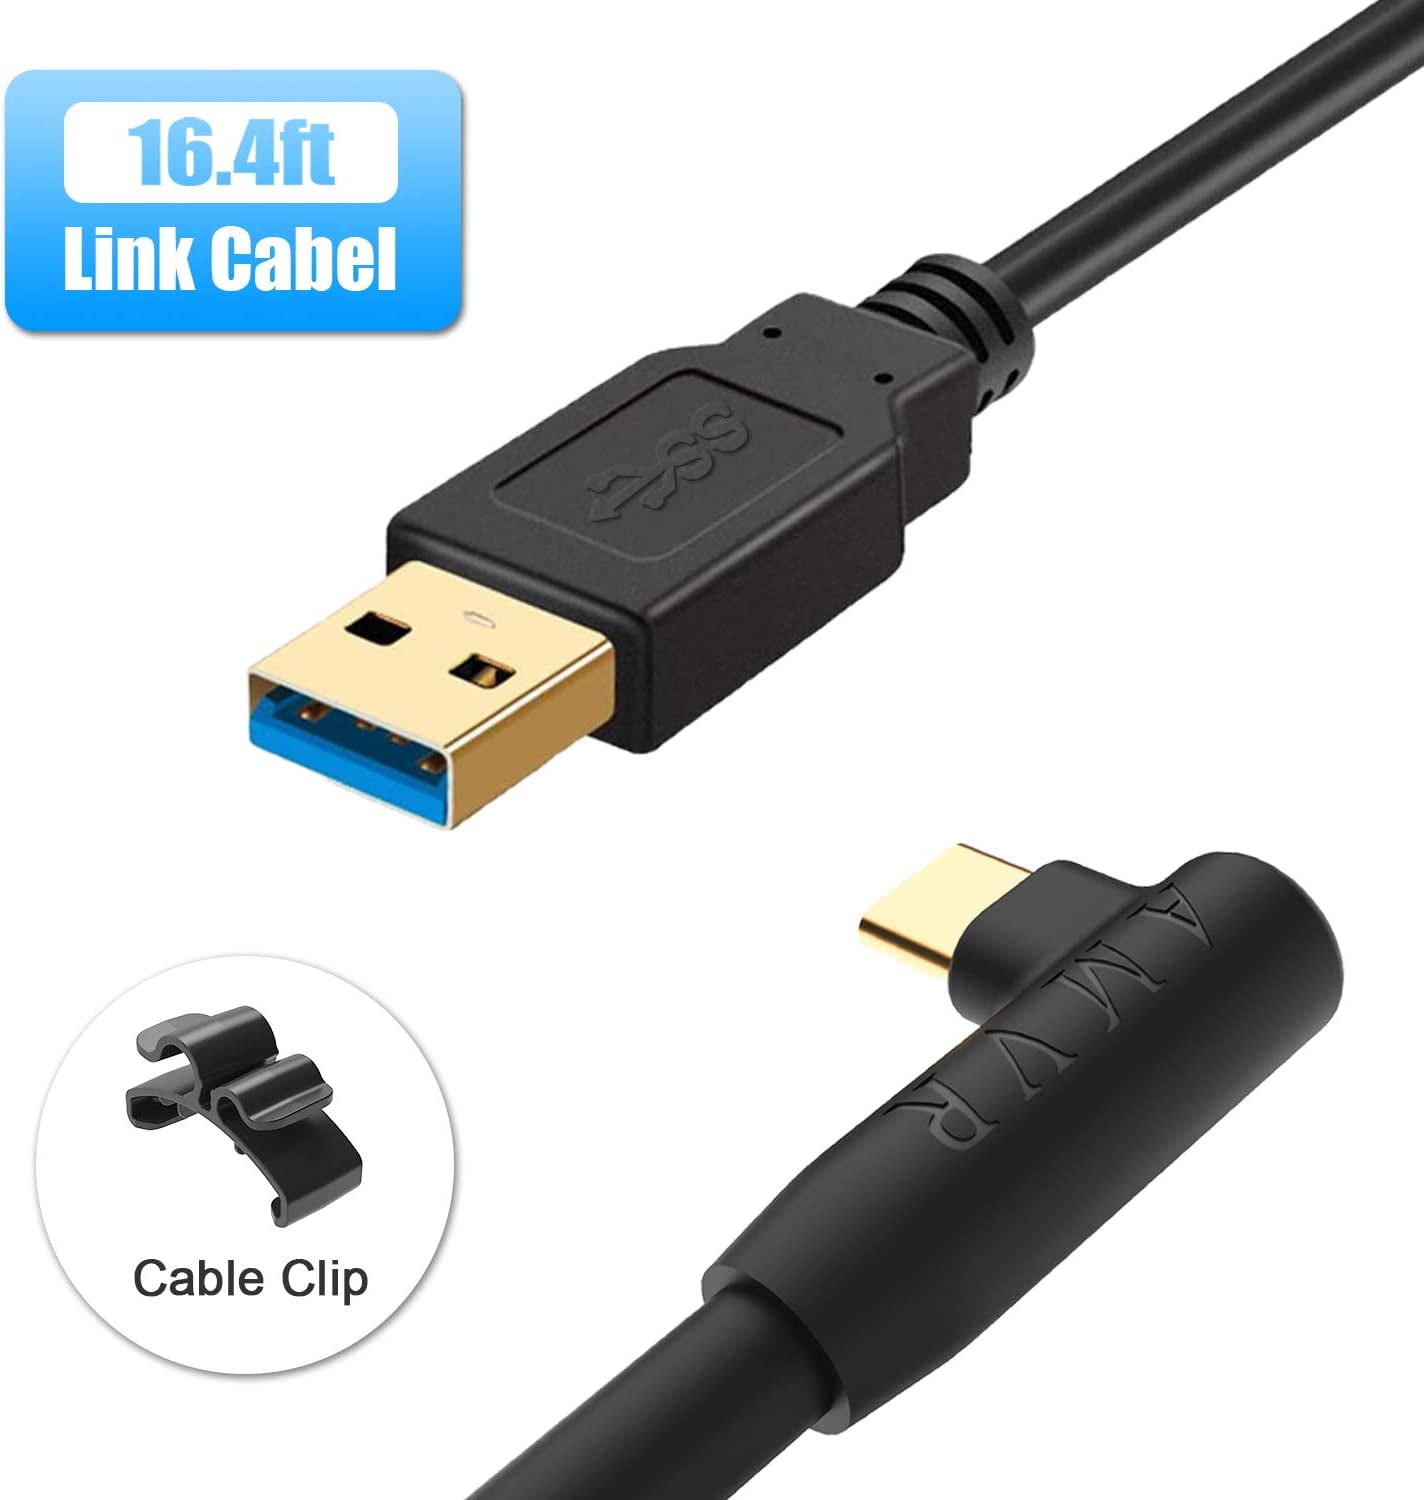 oculus link cable usb 3.0